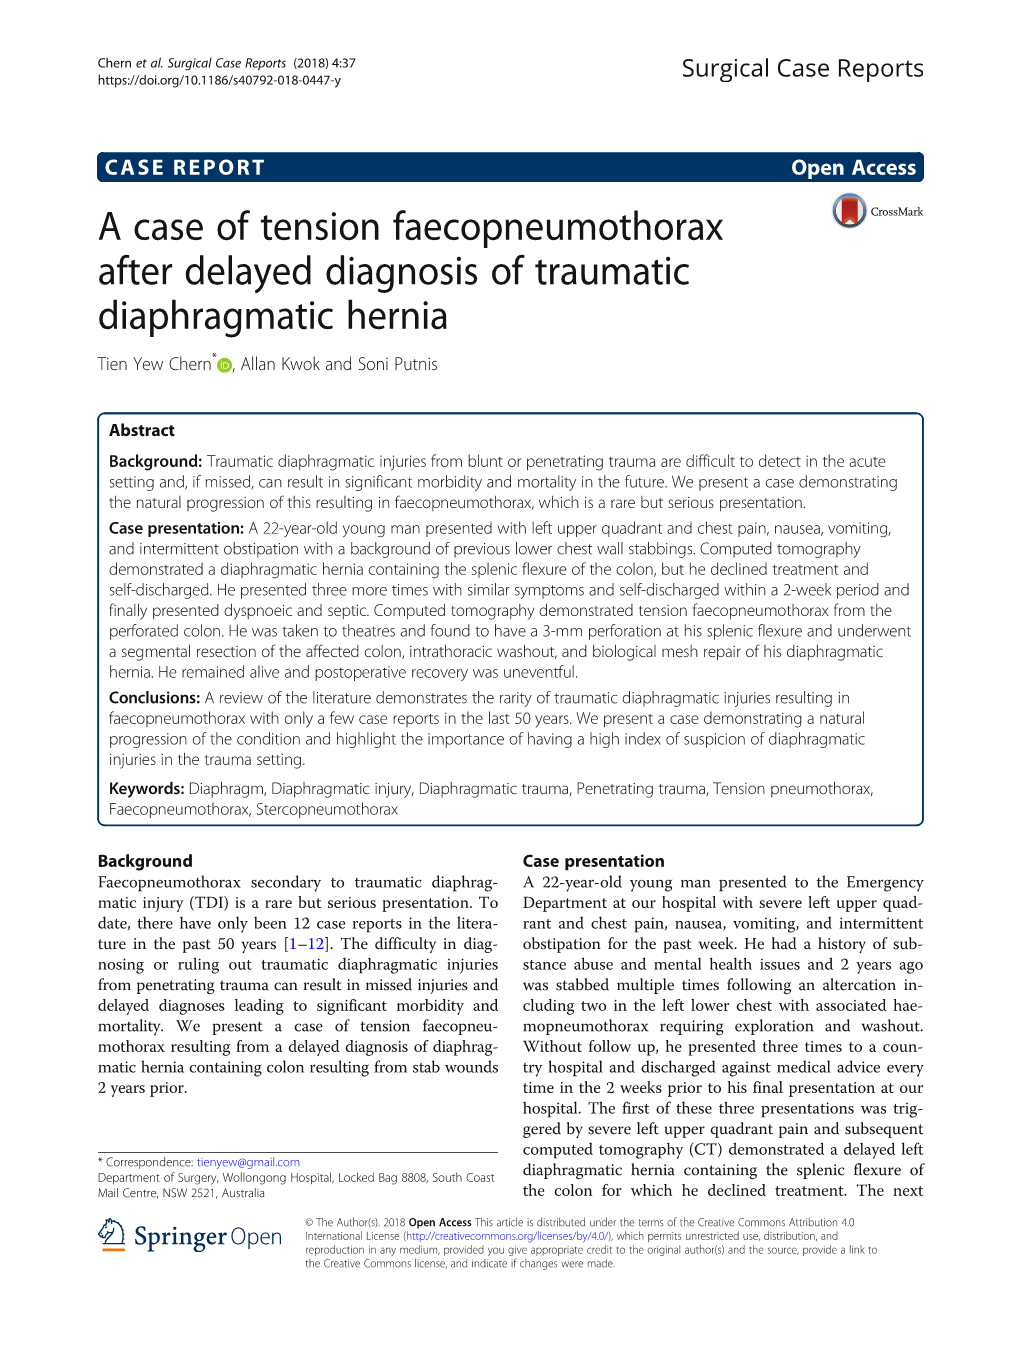 A Case of Tension Faecopneumothorax After Delayed Diagnosis of Traumatic Diaphragmatic Hernia Tien Yew Chern* , Allan Kwok and Soni Putnis